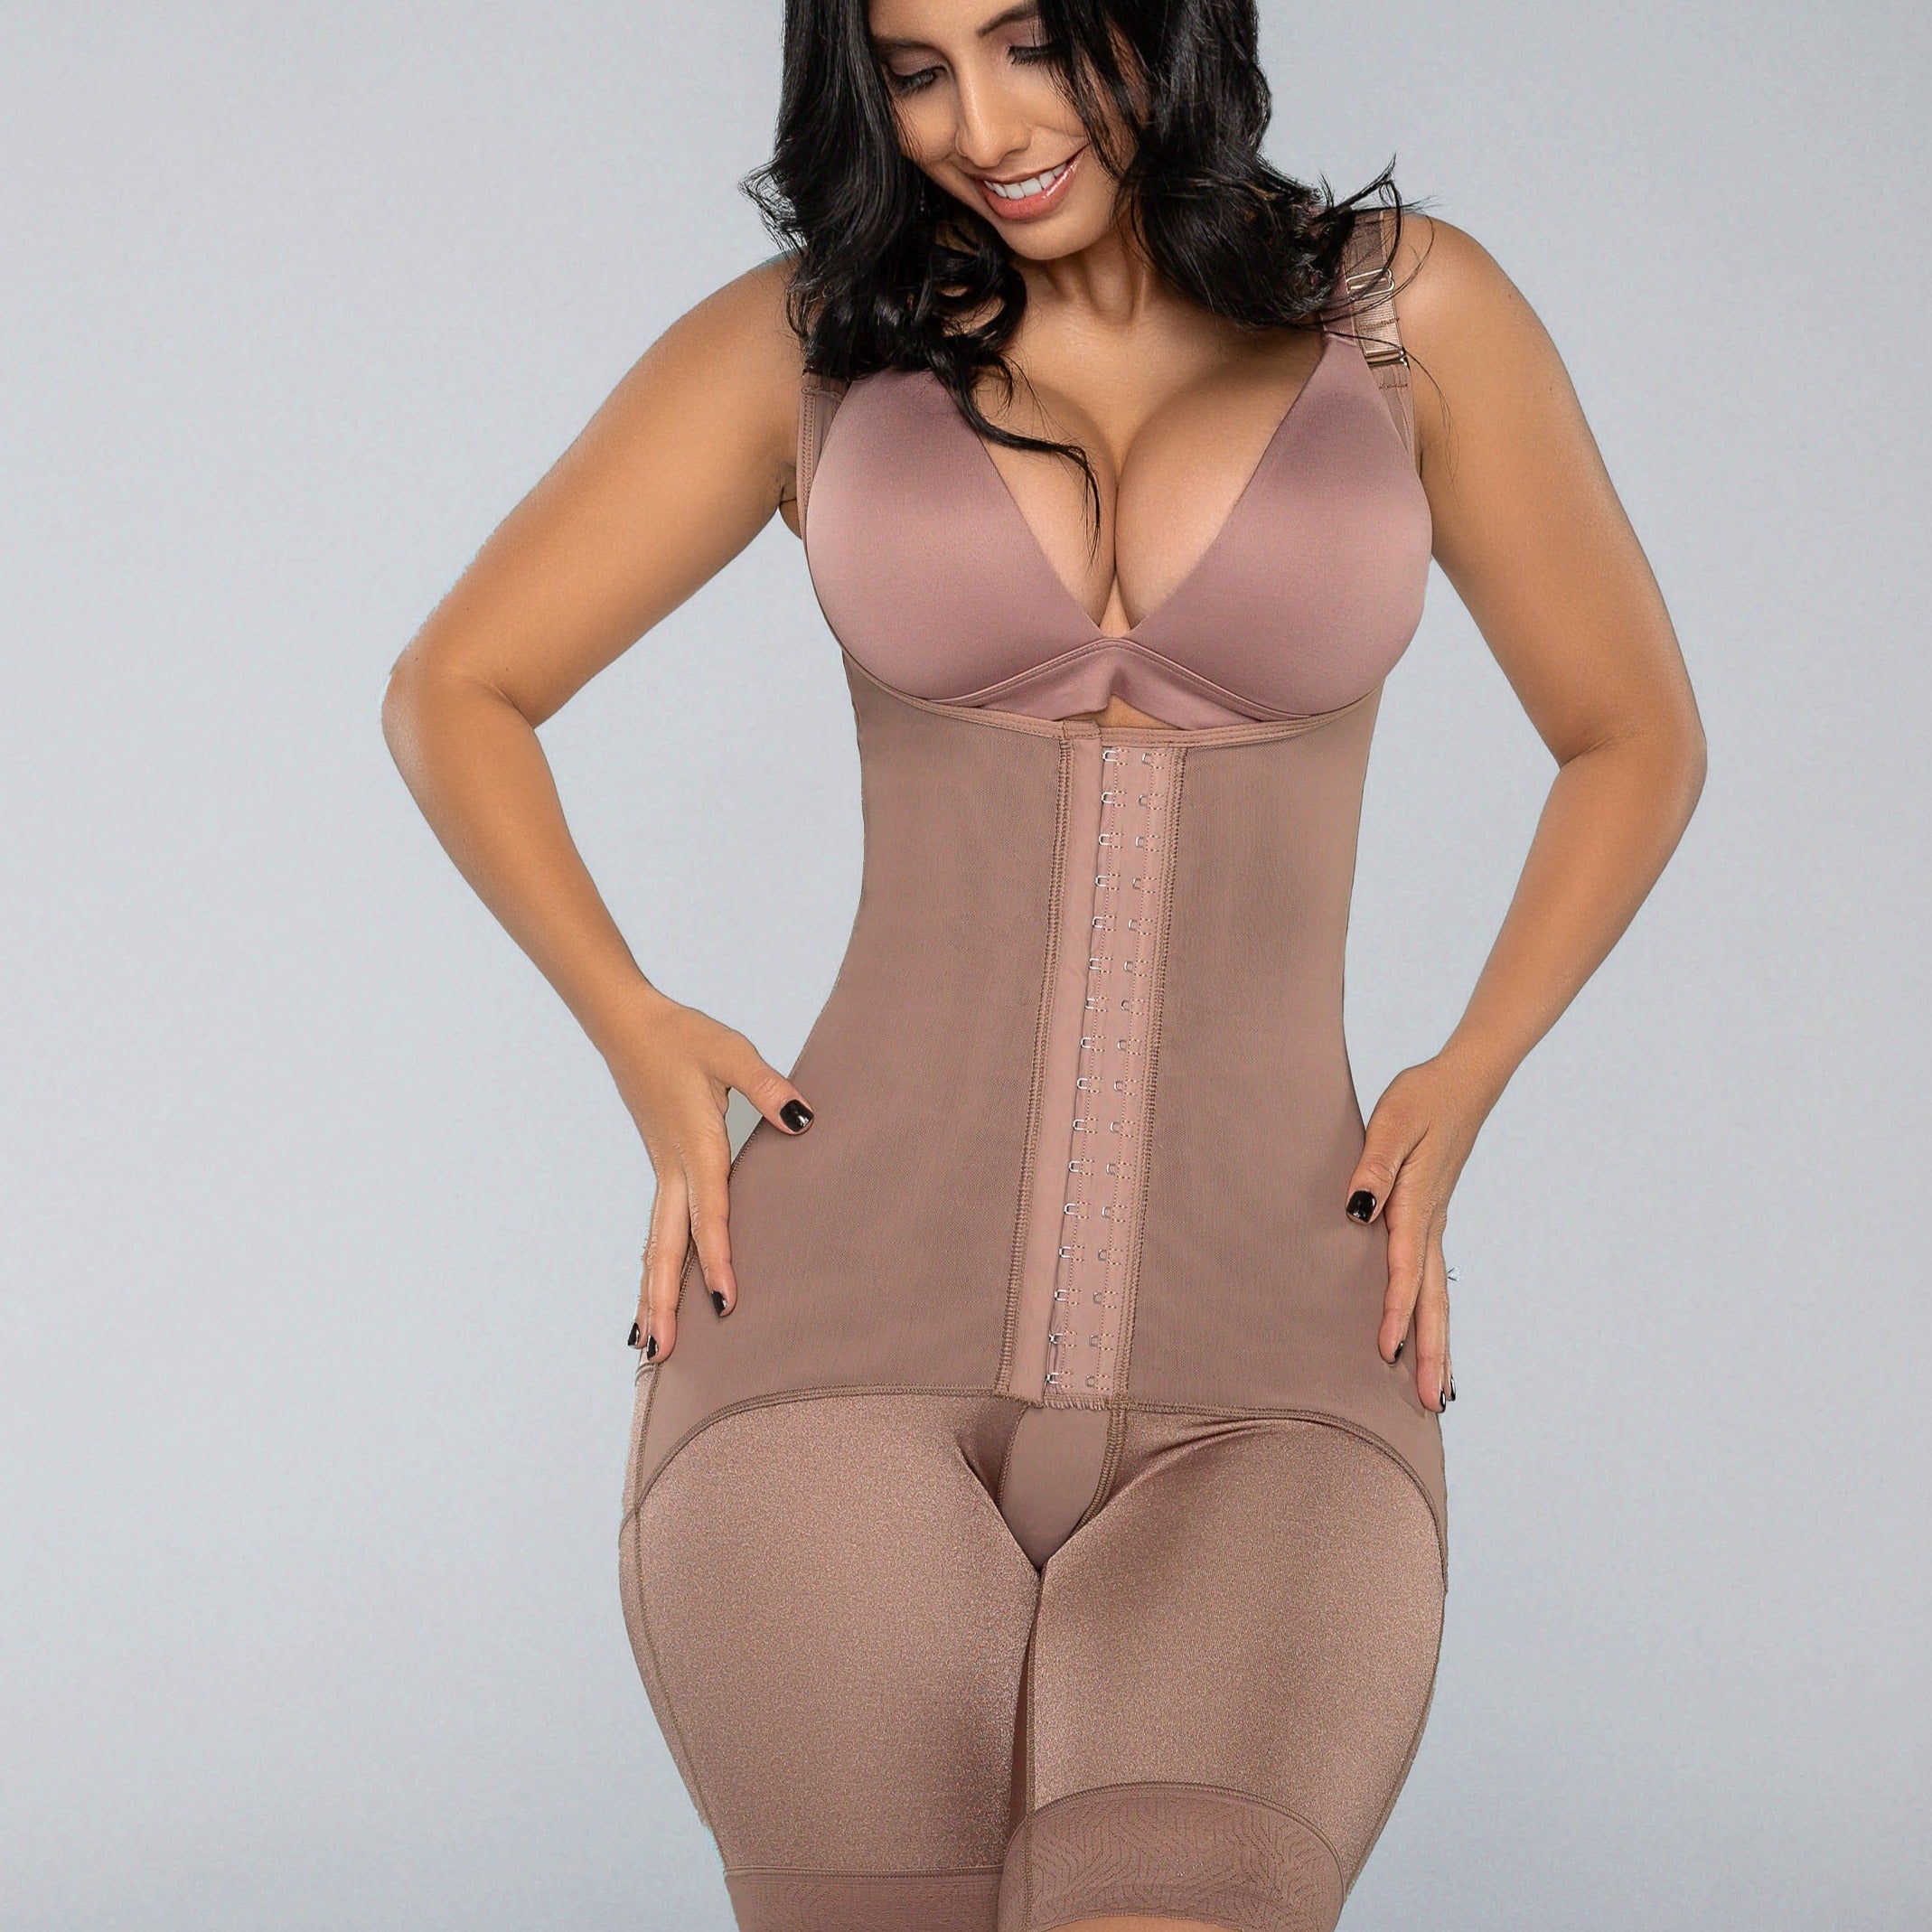 Hourglass Colombian Faja with High Ab Compression Post Op